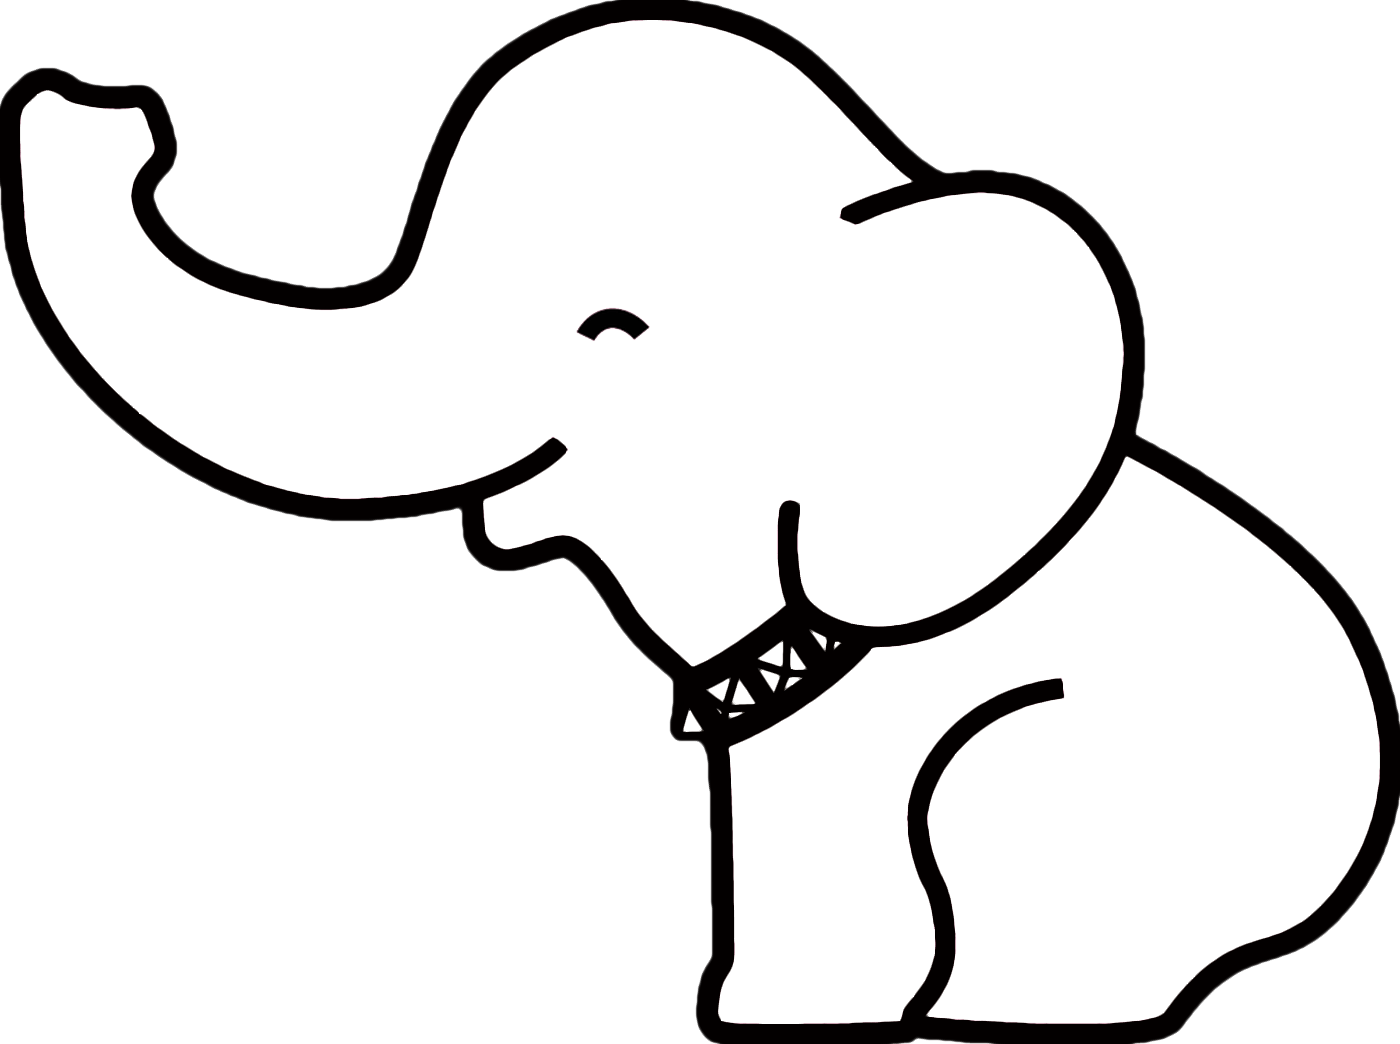 Elephant PNG HD Outline - 157153